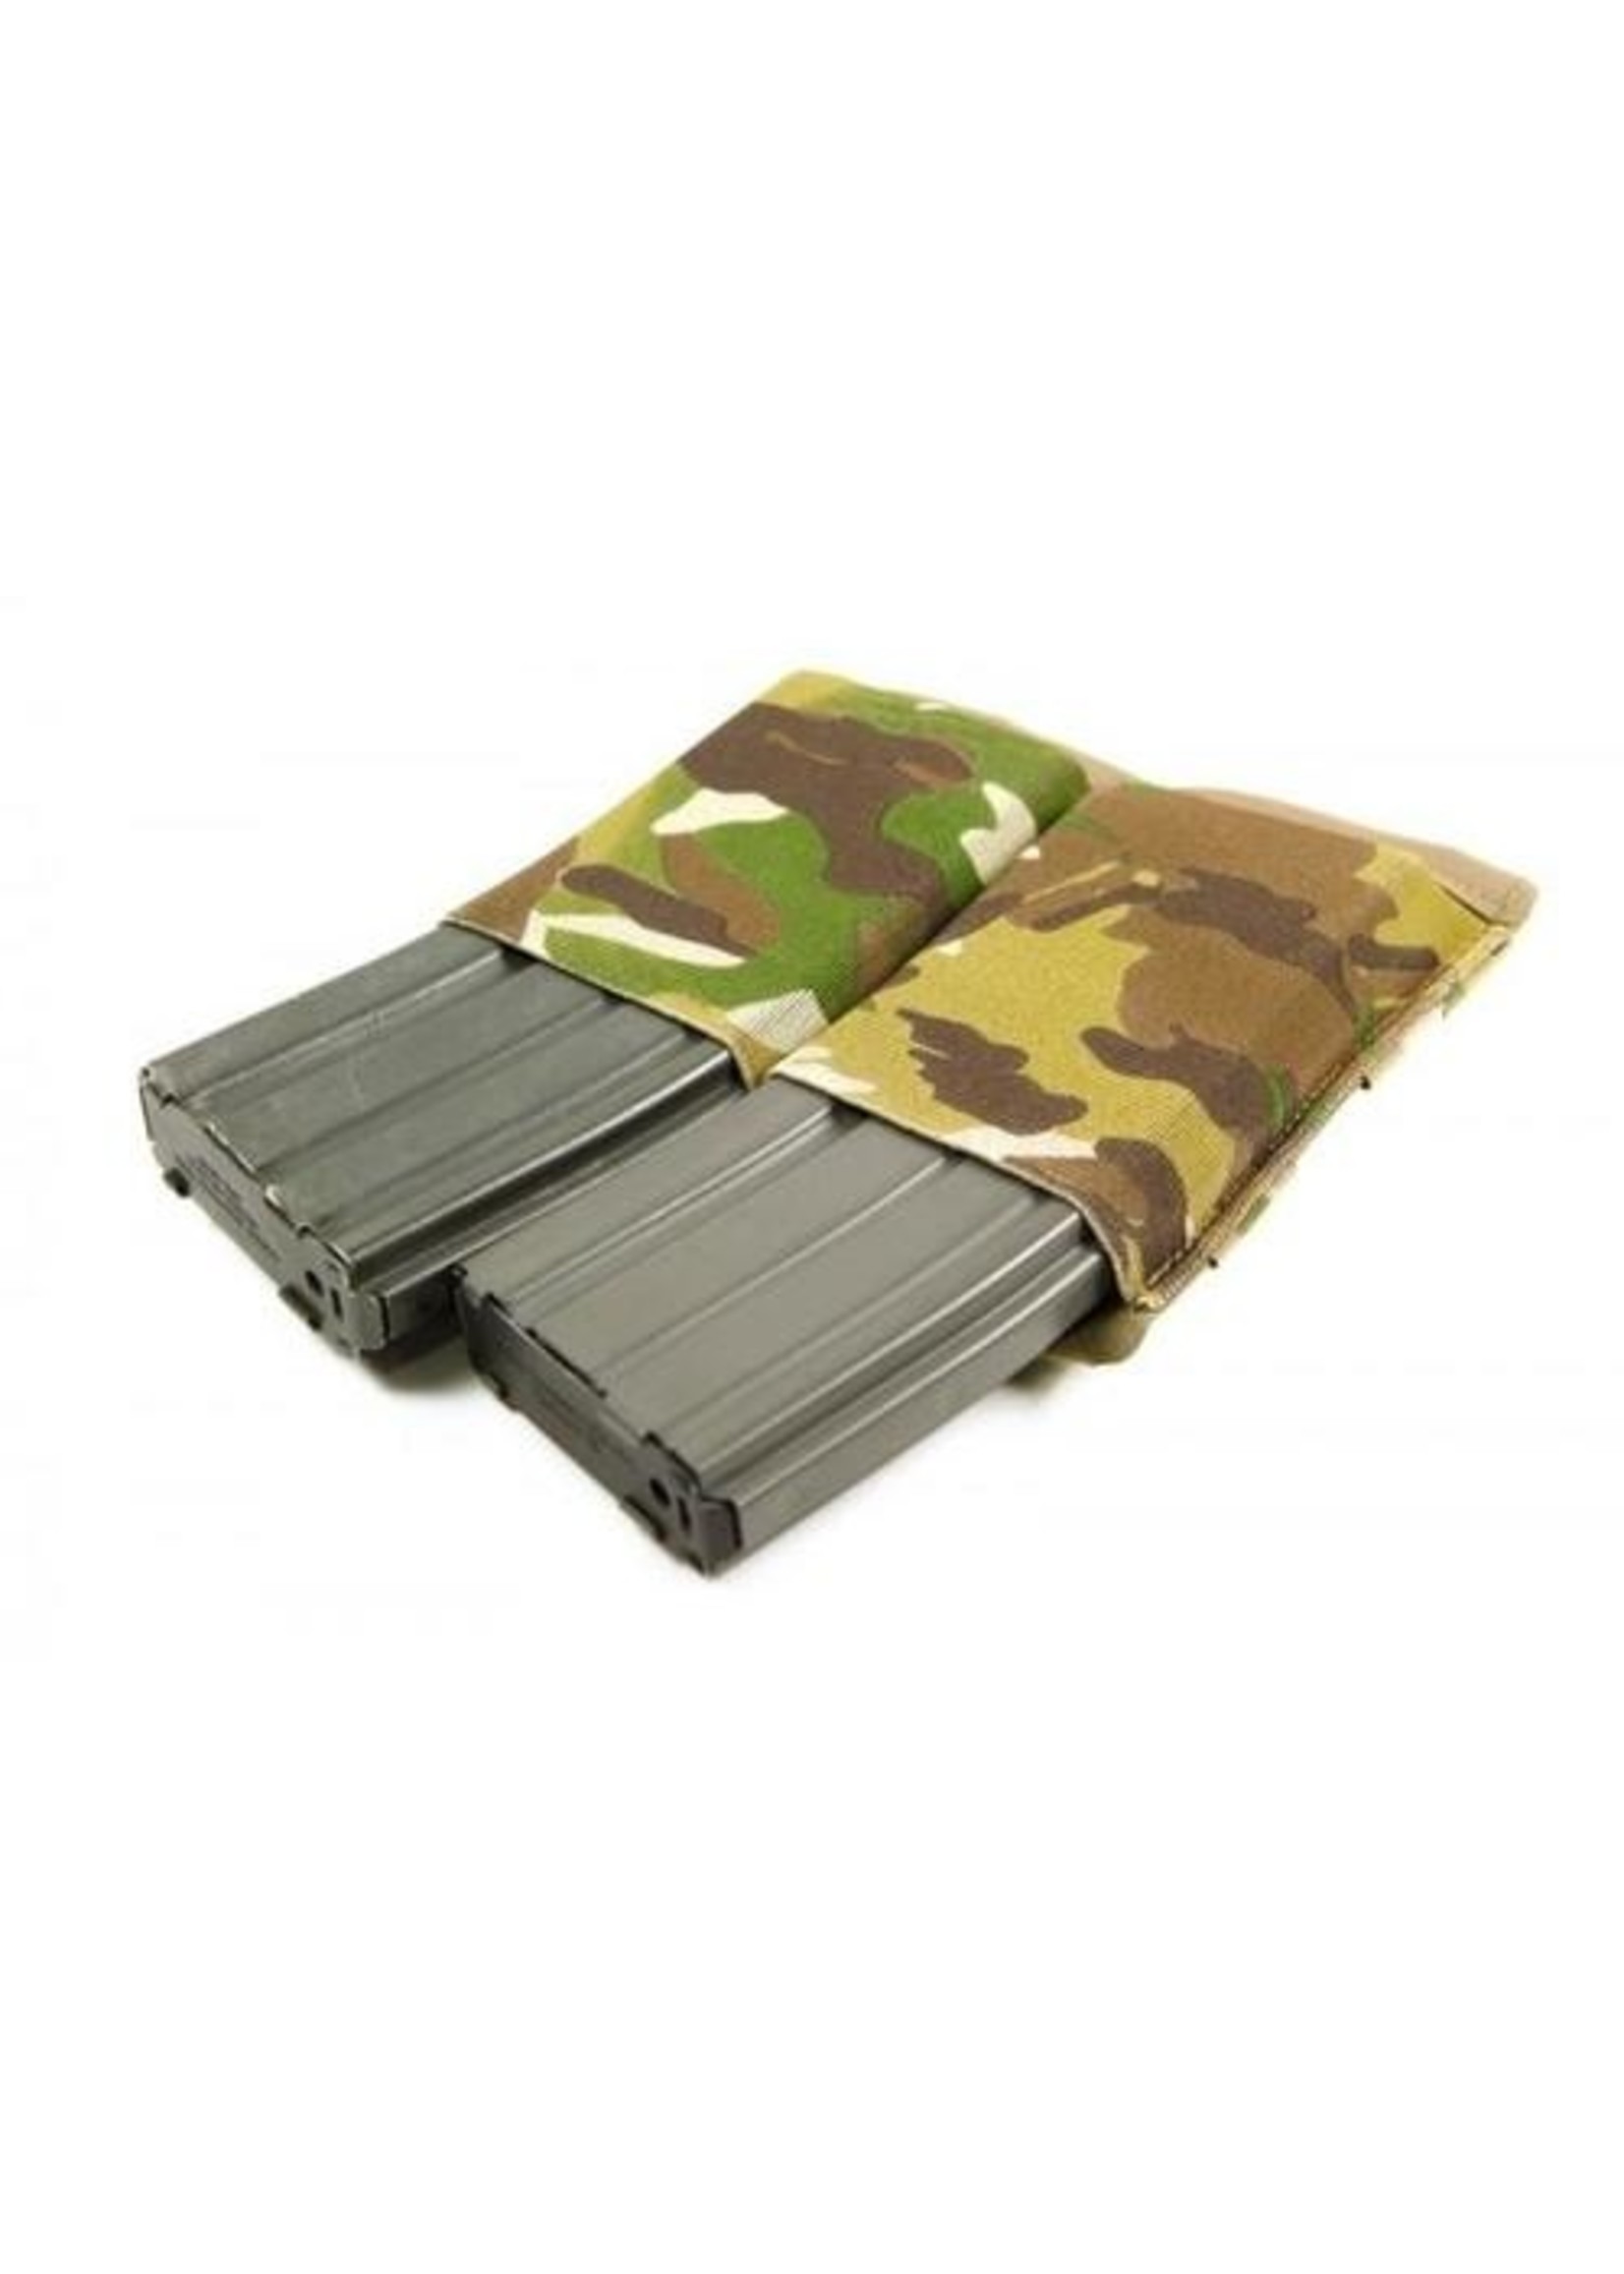 BLUE FORCE GEAR TEN-SPEED DOUBLE M4 MAG POUCH